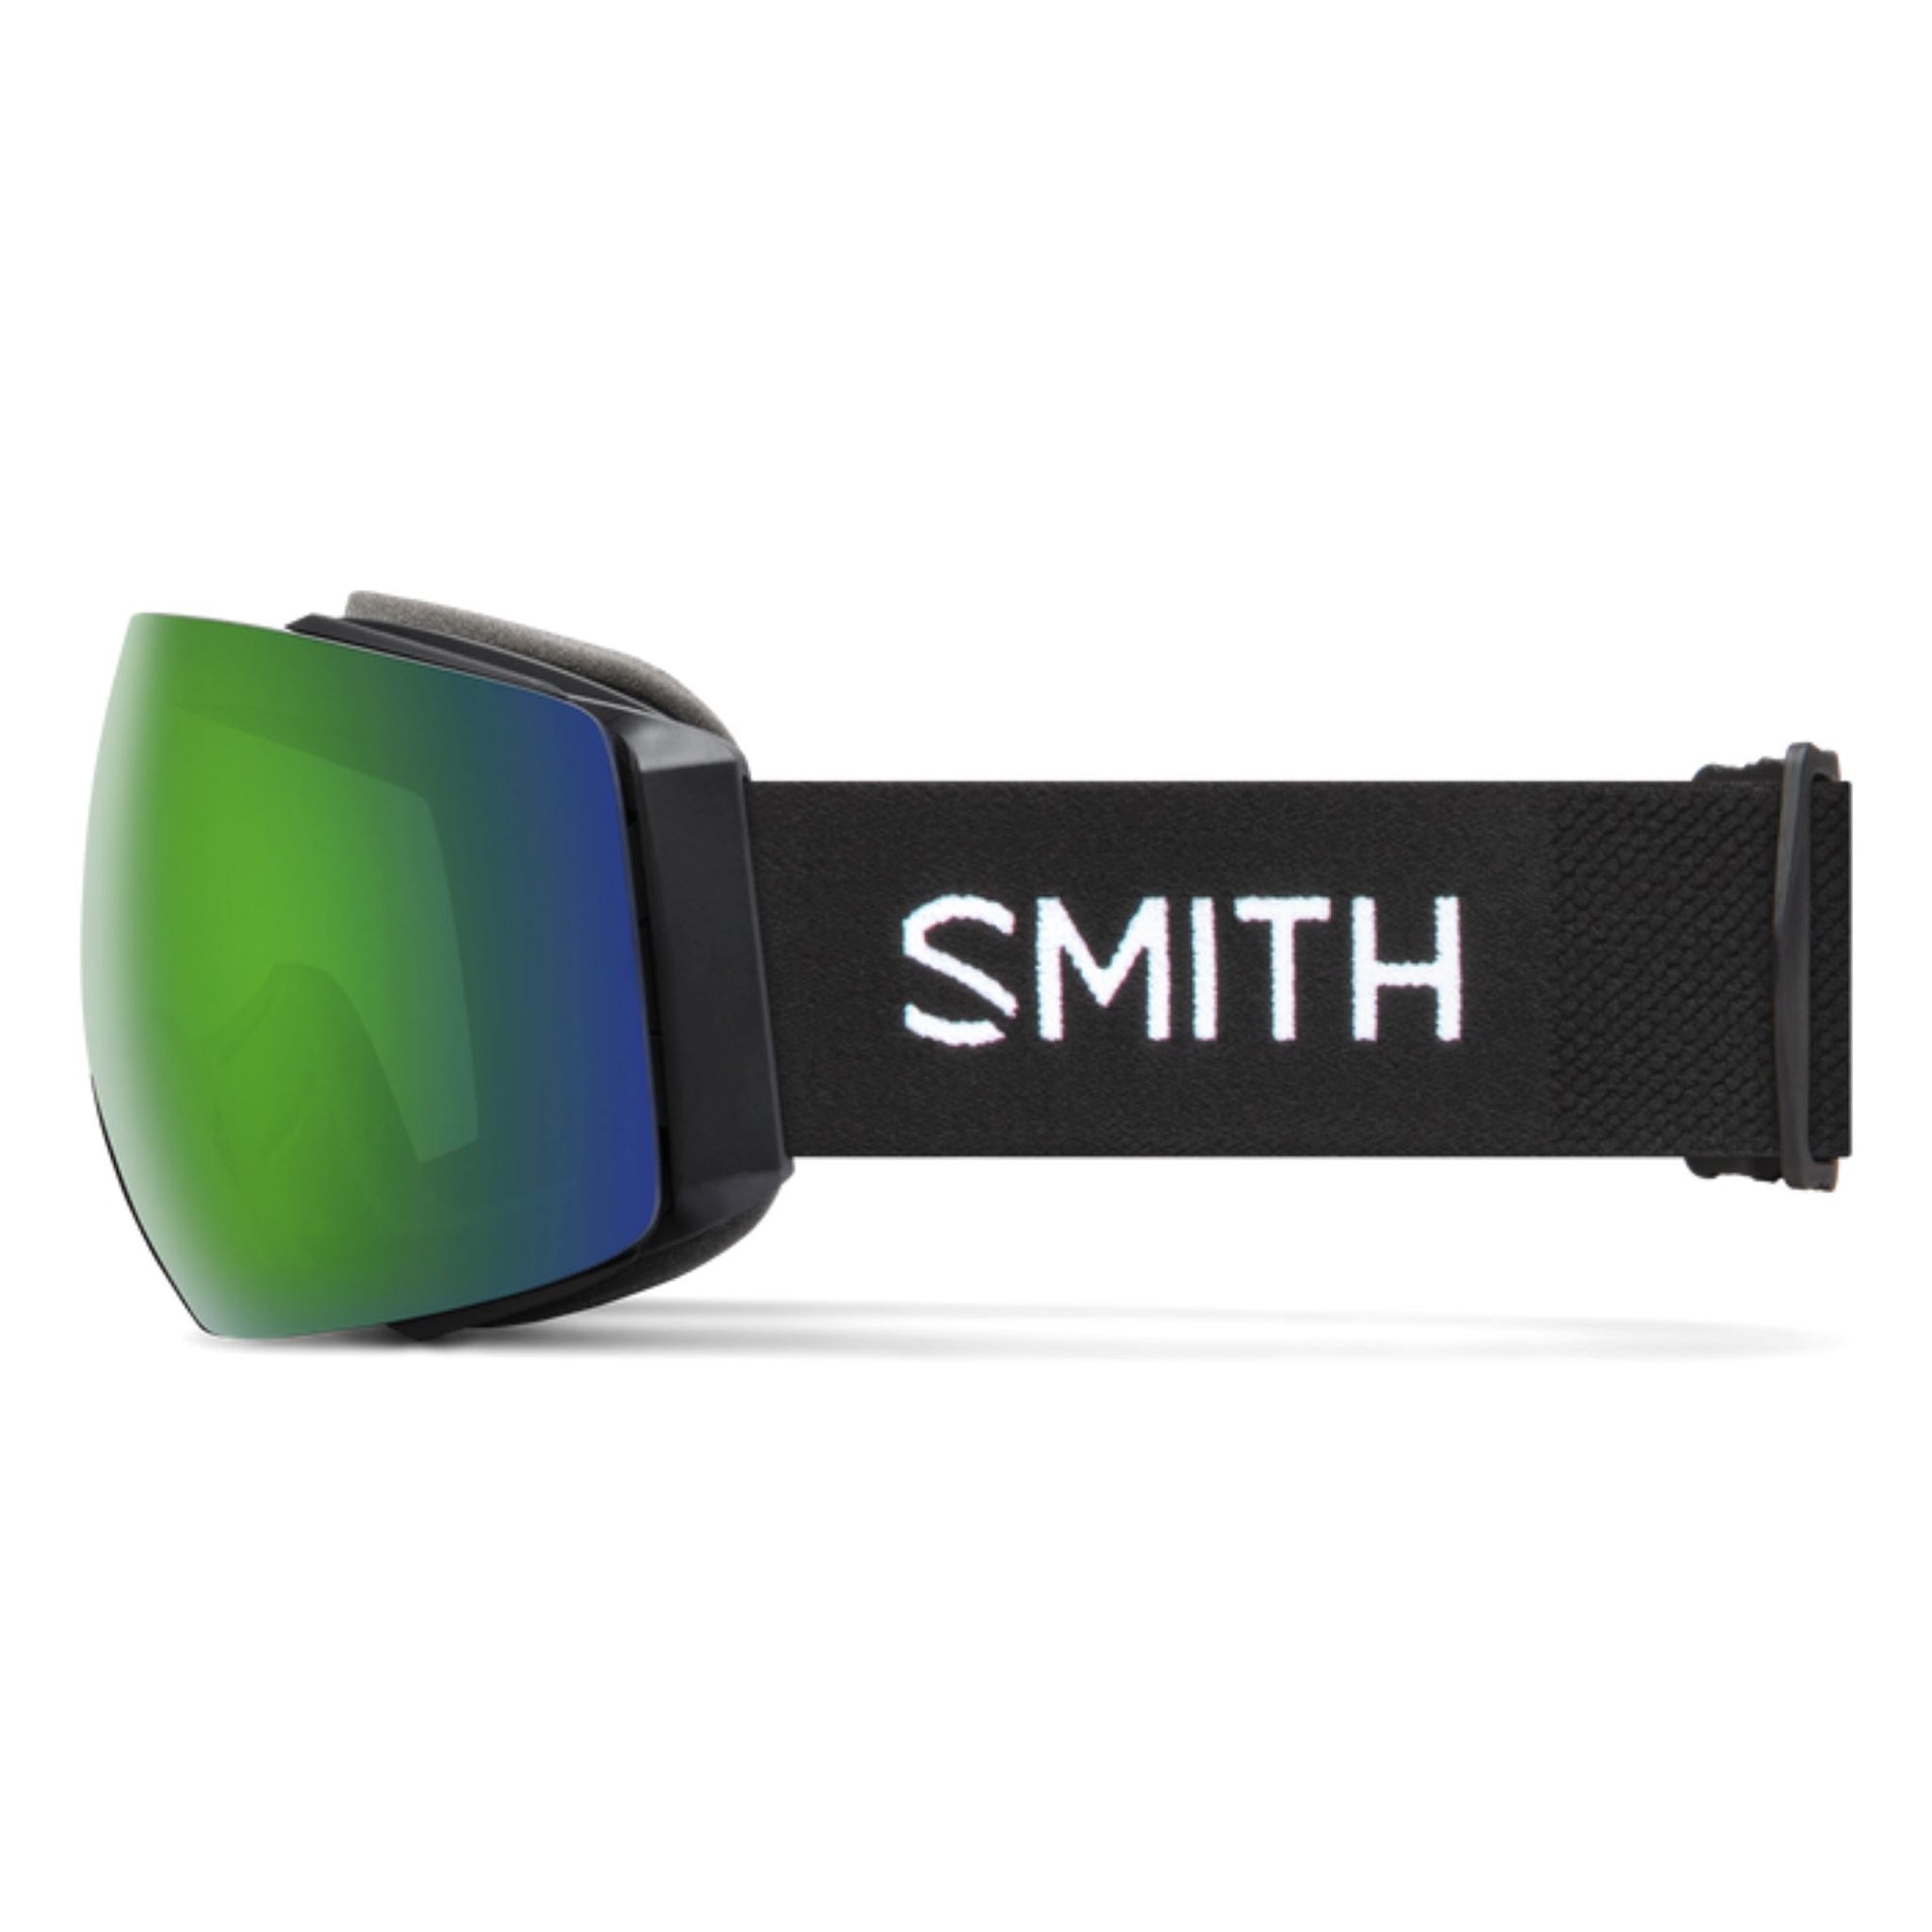 Smith I/O MAG XL Goggles (Large Fit) - Black ChromaPop Everyday Green Mirror Goggles Smith 